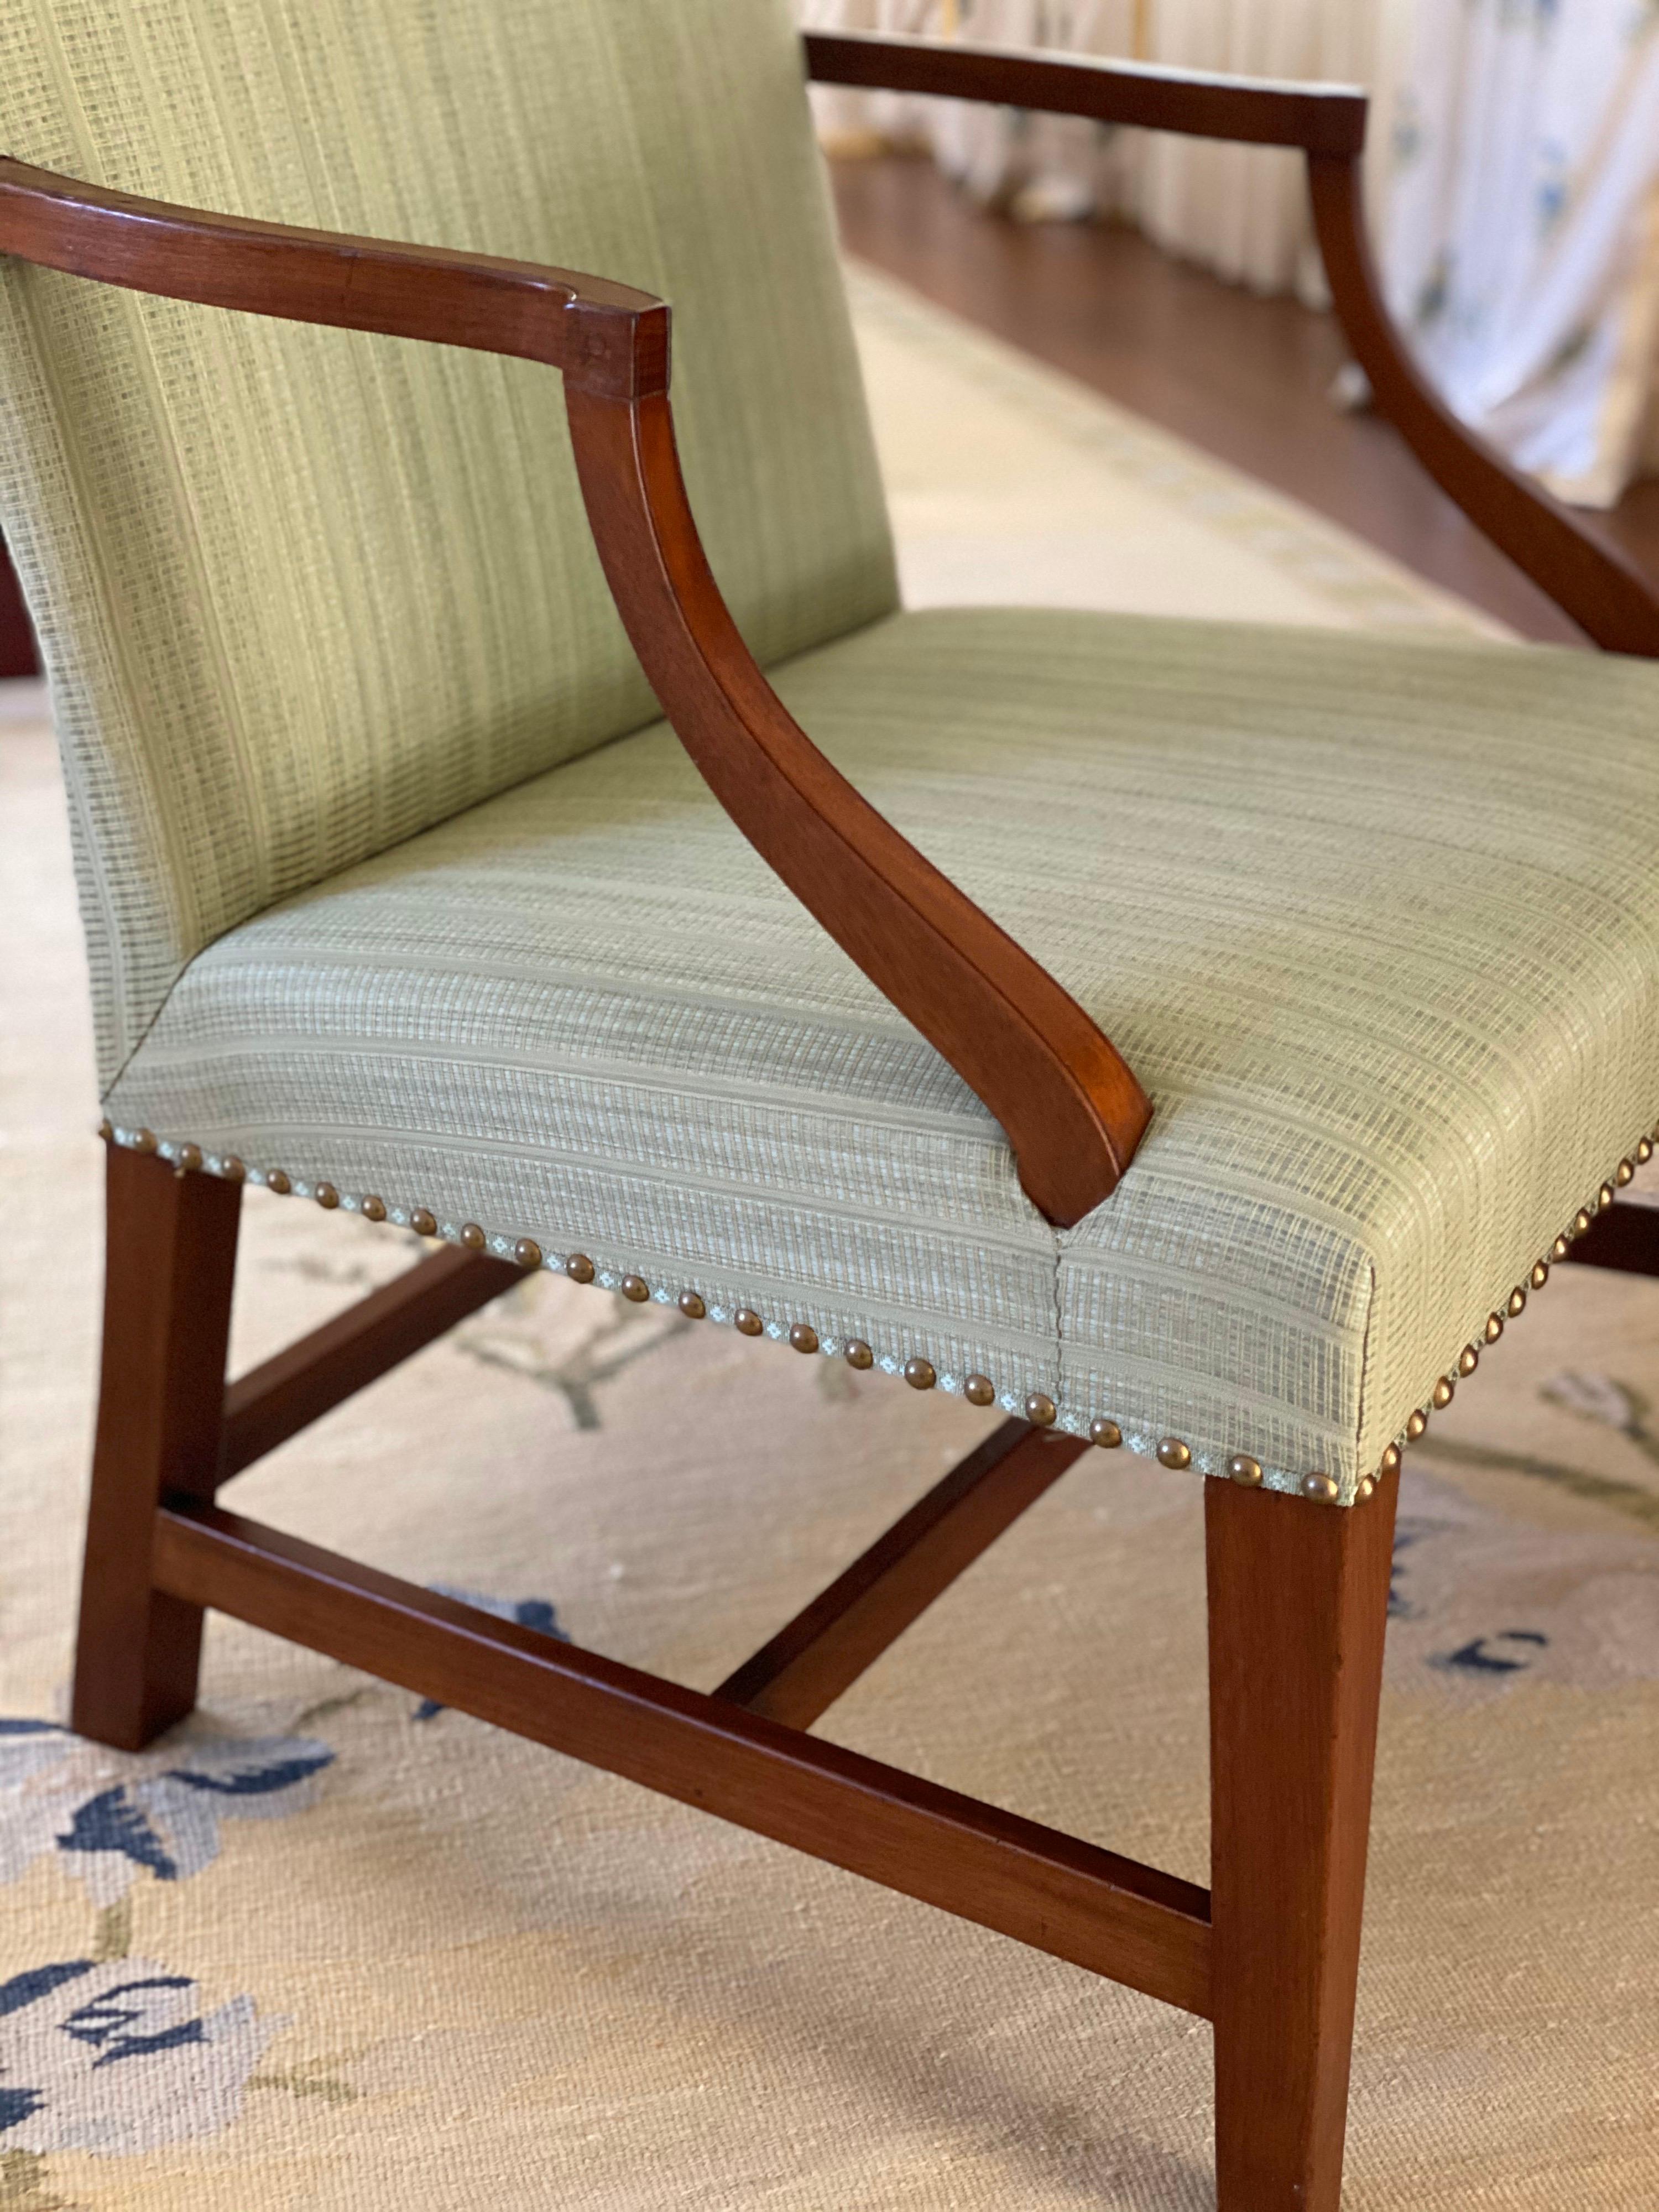 18th century federal Hepplewhite lolling chair,
Massachusetts, Probably Boston or North Shore, Circa 1790
Primary wood: Mahogany
Secondary wood: Maple, pine
Covered in textured and striaed green fabric, very good condition.
Measures: 26